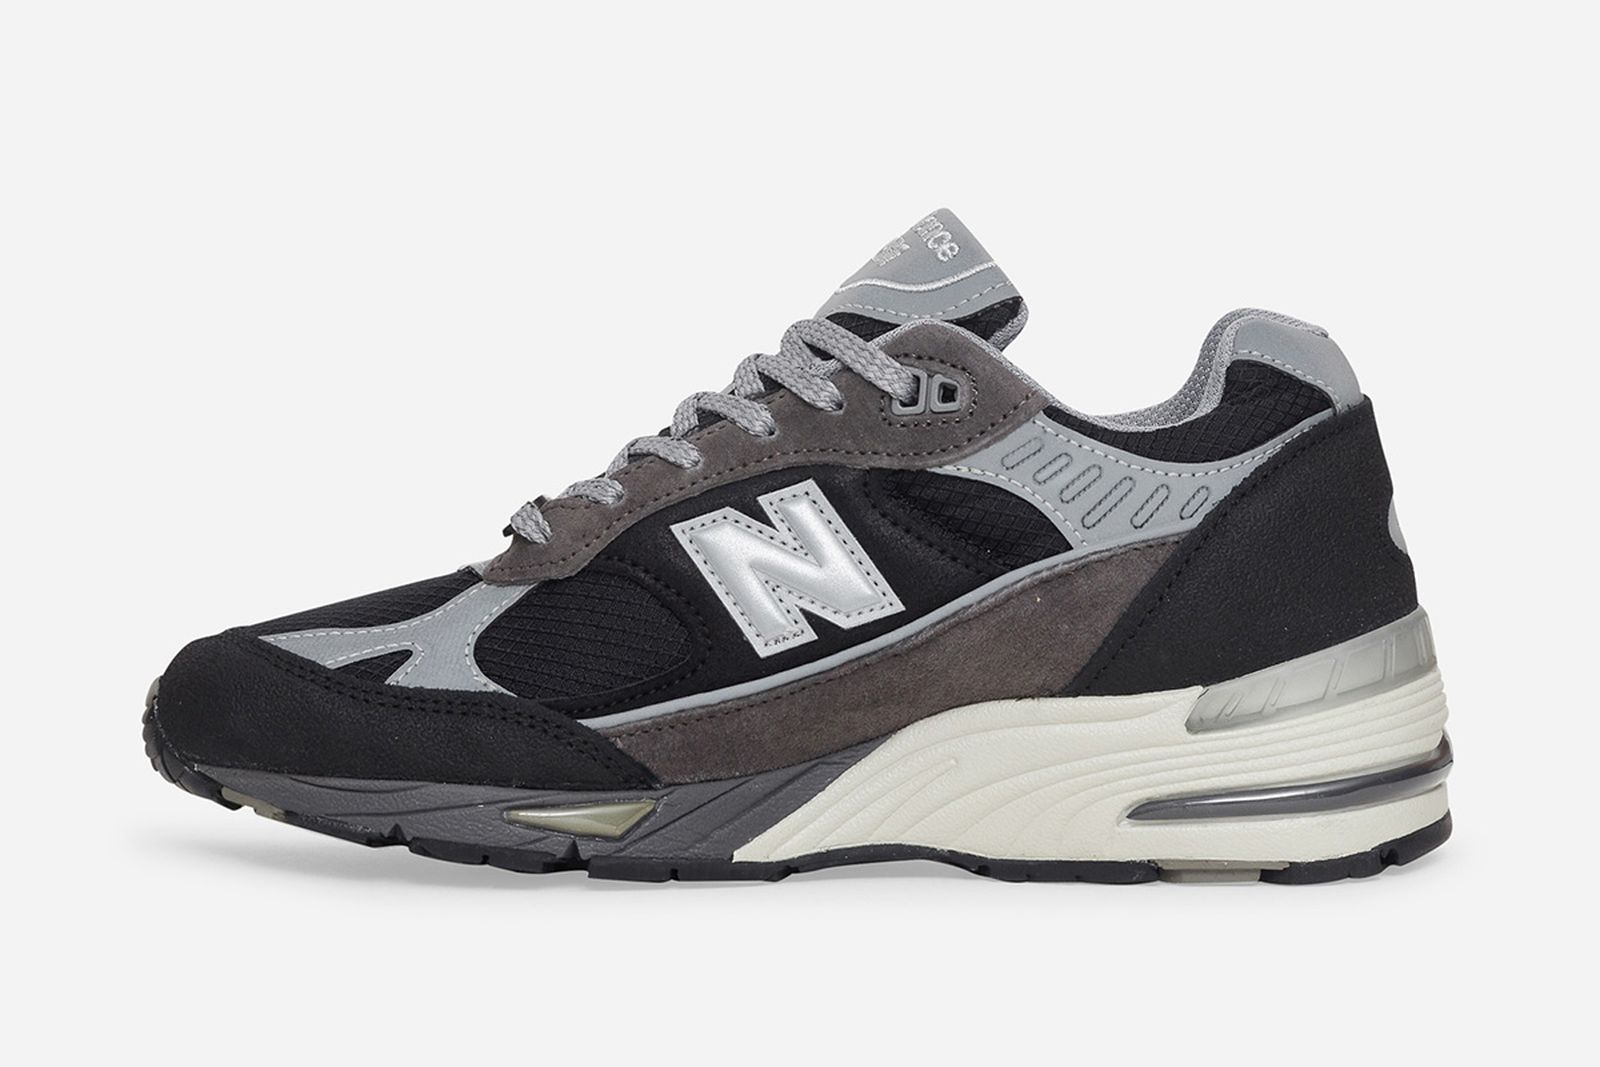 Slam Jam x New Balance 991: Official Images & Release Information